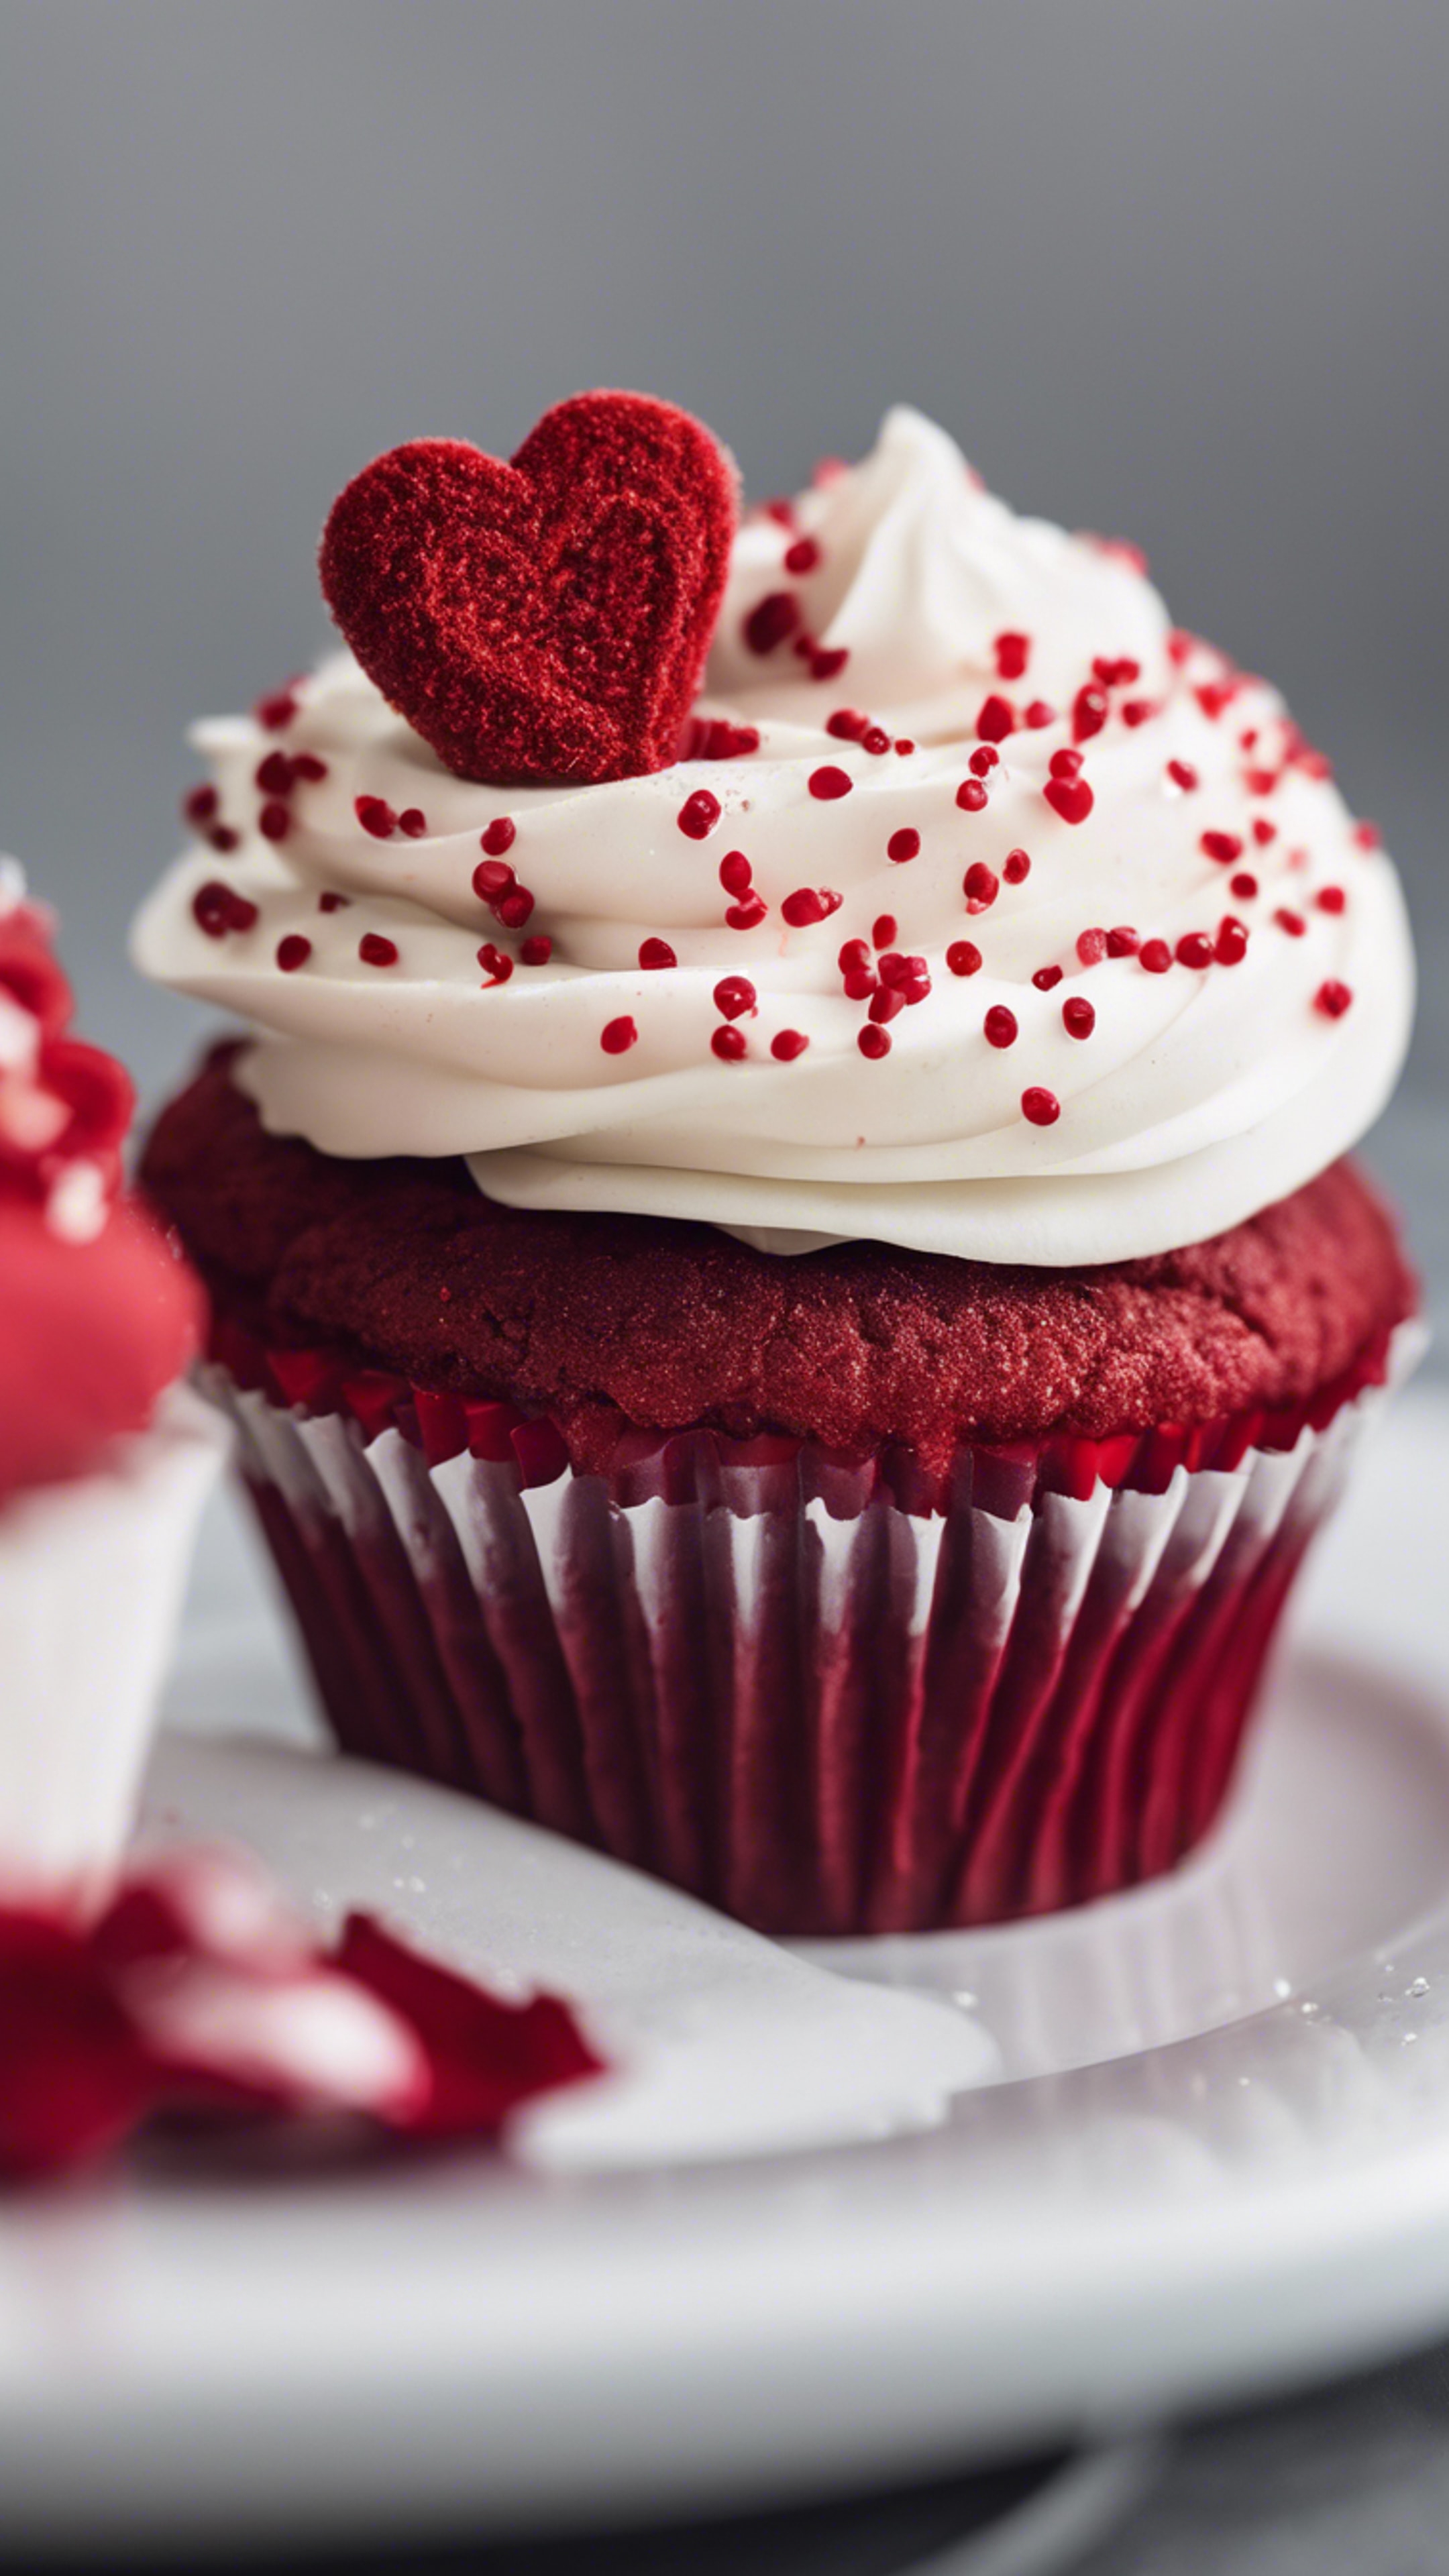 A red velvet cupcake with a heart-shaped sprinkle on top, presented on a white ceramic plate. Wallpaper[2d98083c137b4c3e8f81]